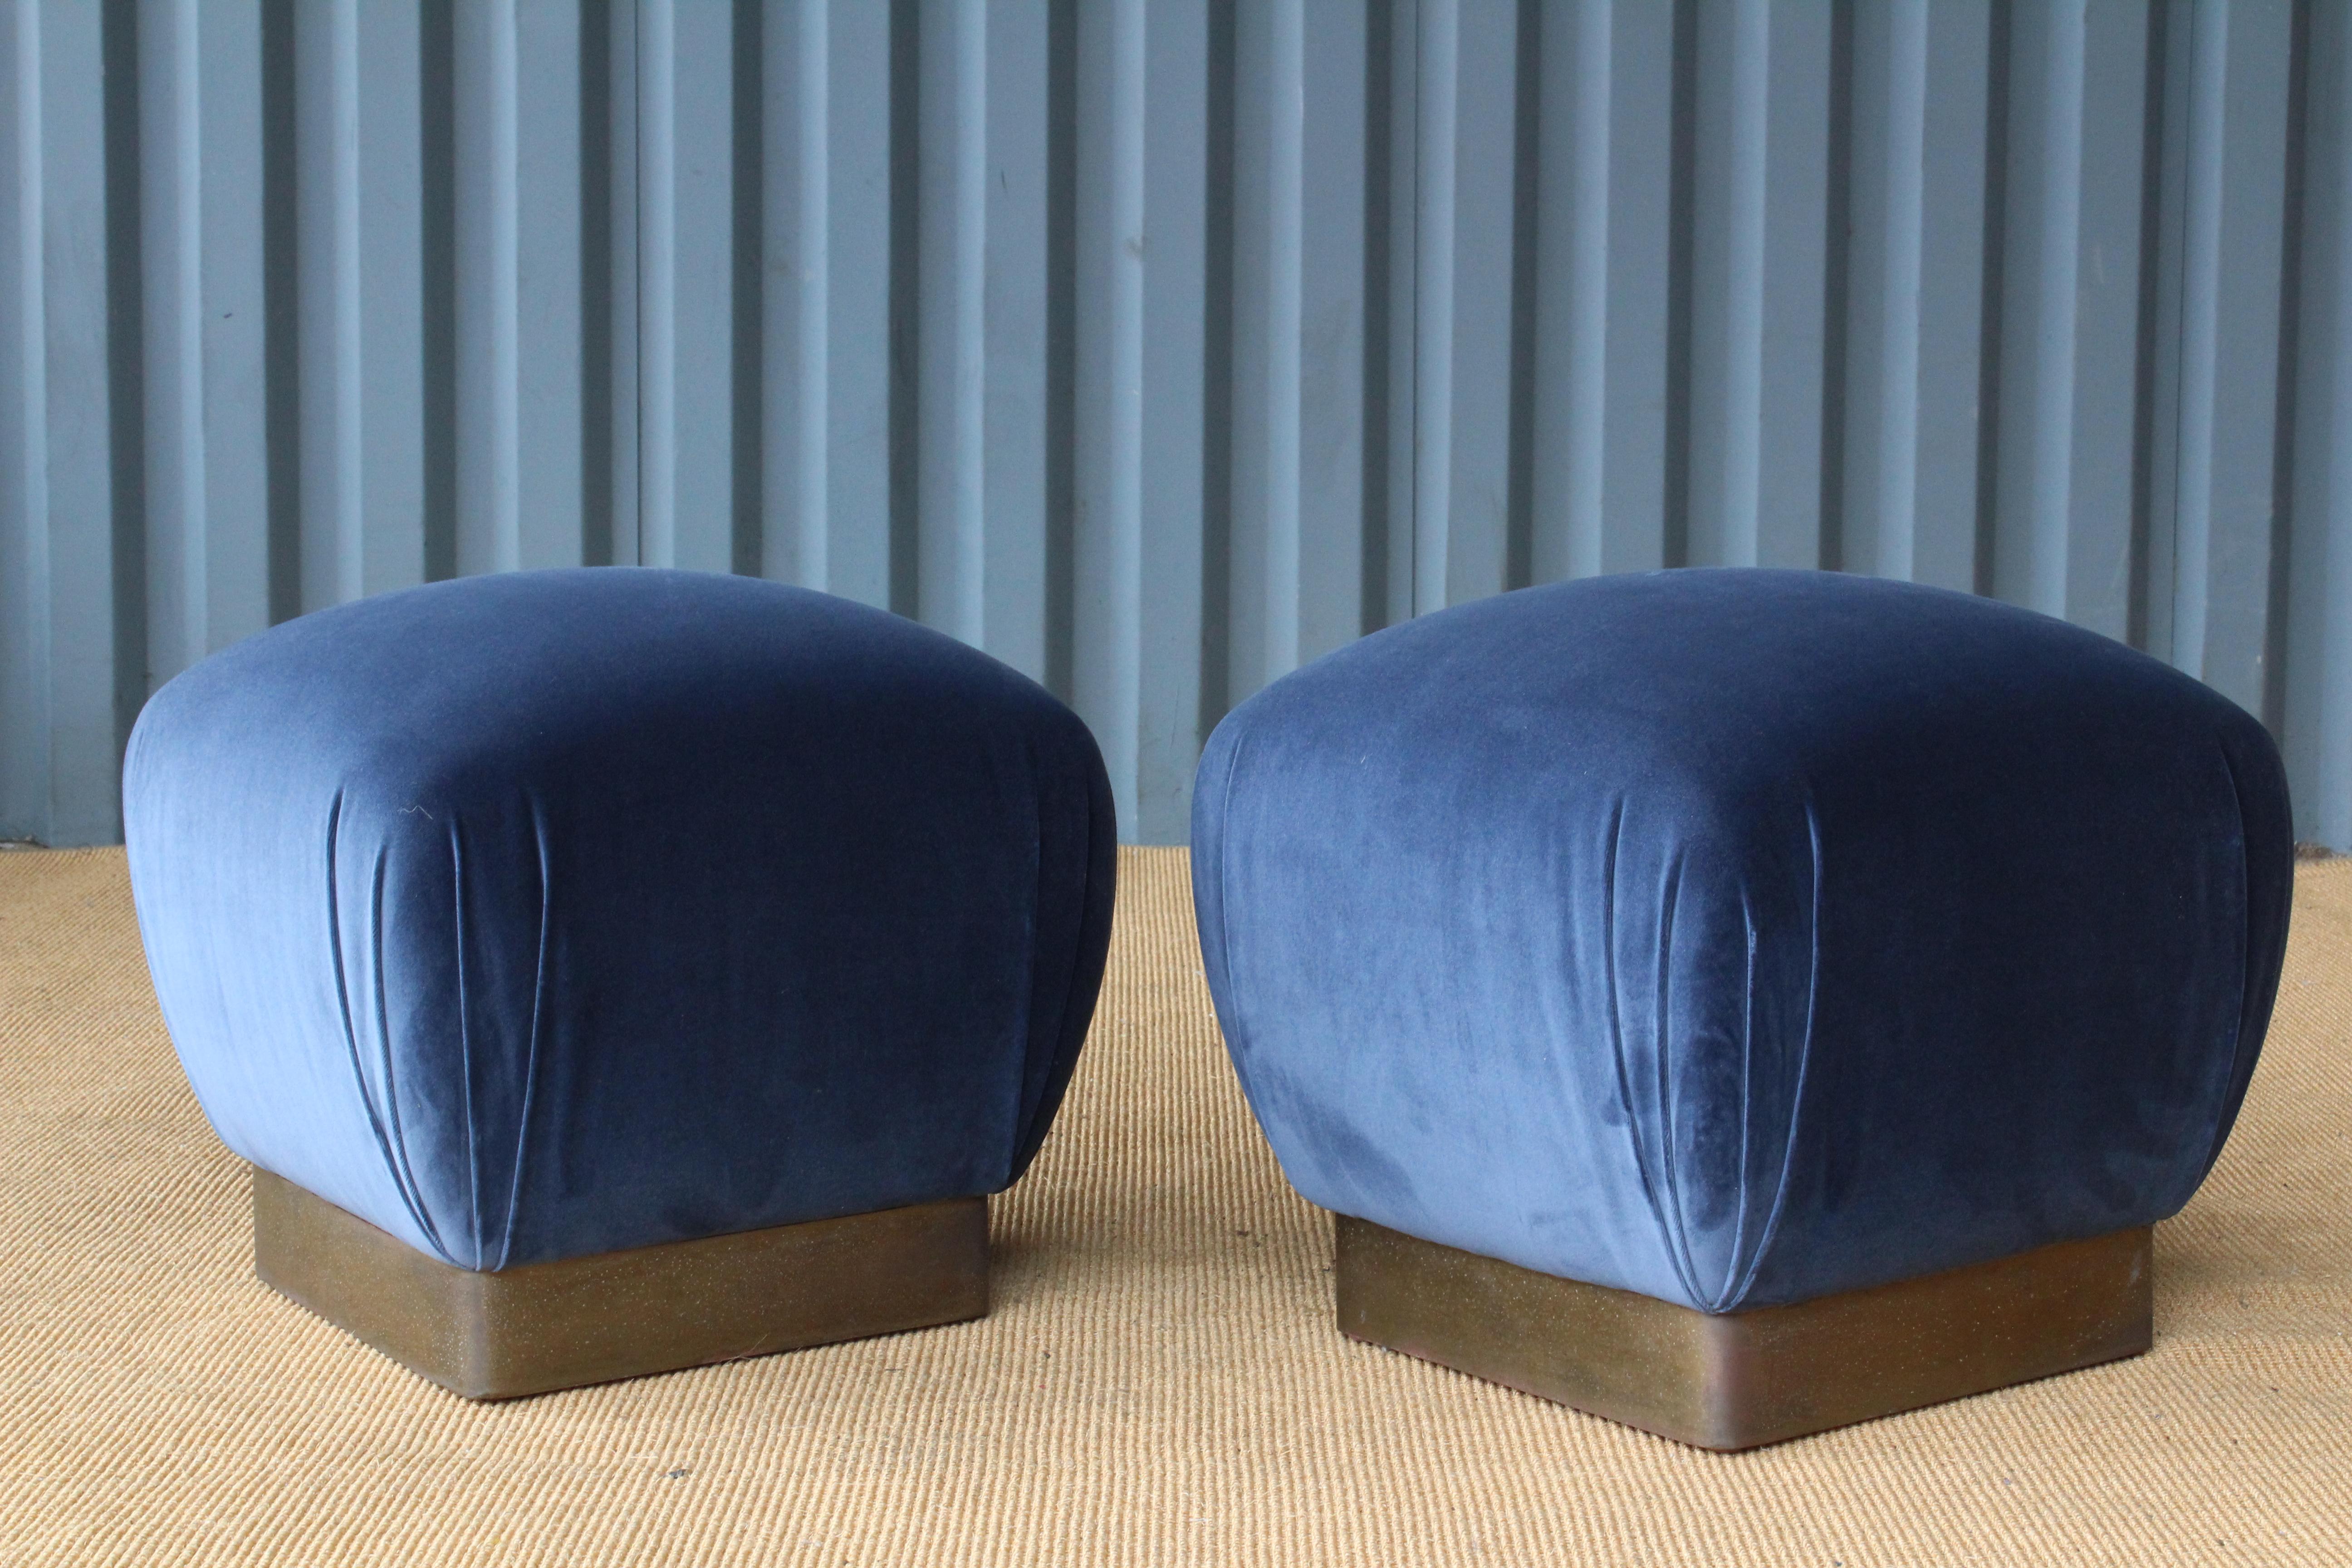 Pair of Ottomans or Stools in the Style of Karl Springer, 1970s (Messing)